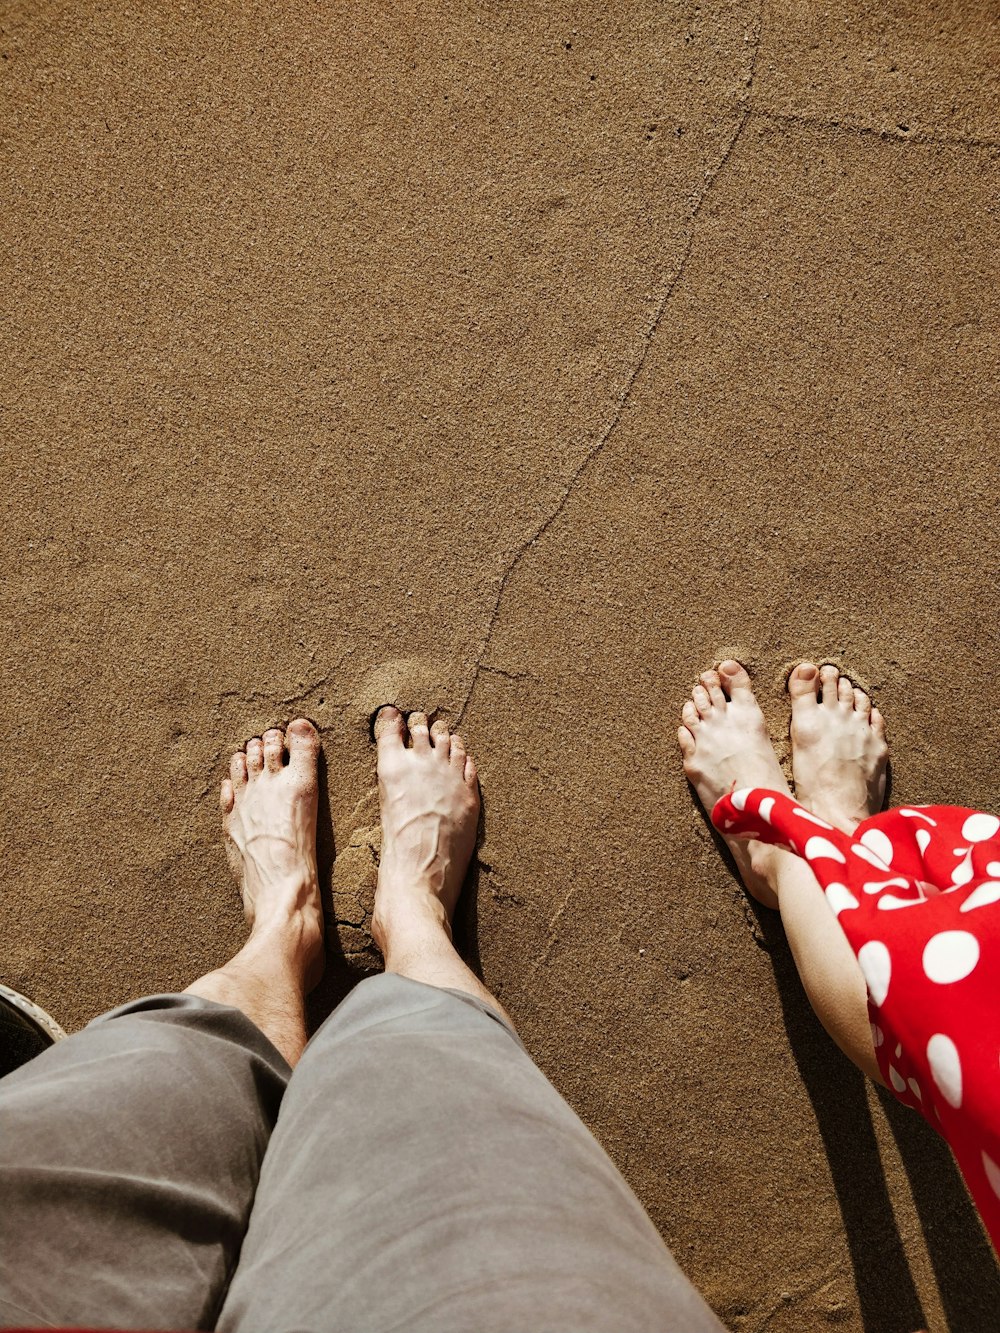 man and woman standing on sand during day